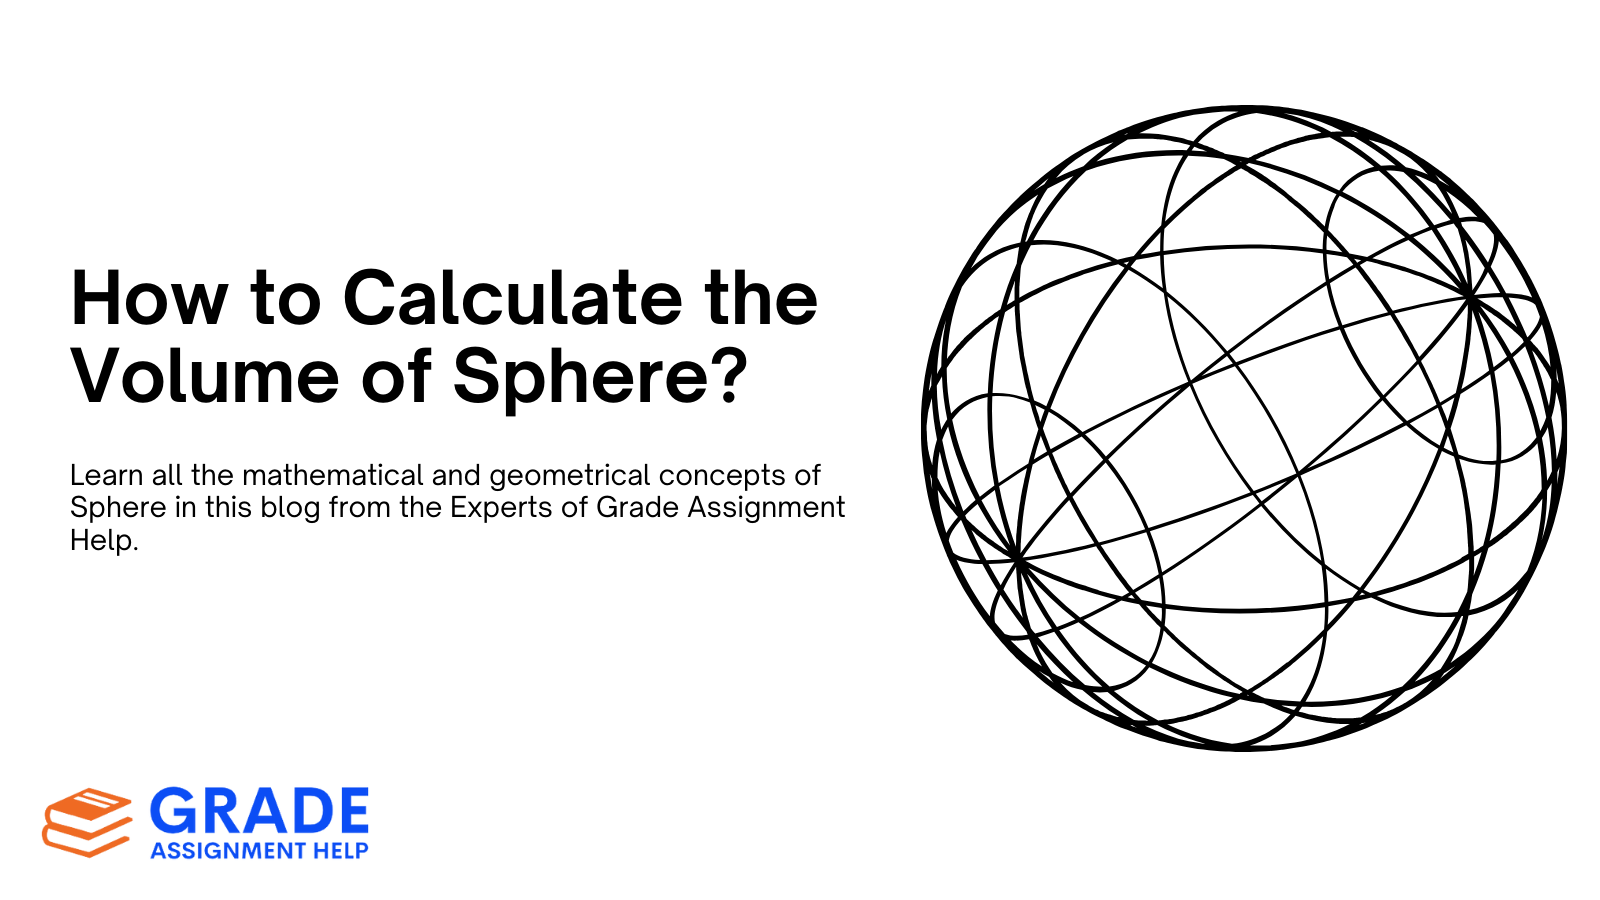 How to Calculate the Volume of a Sphere